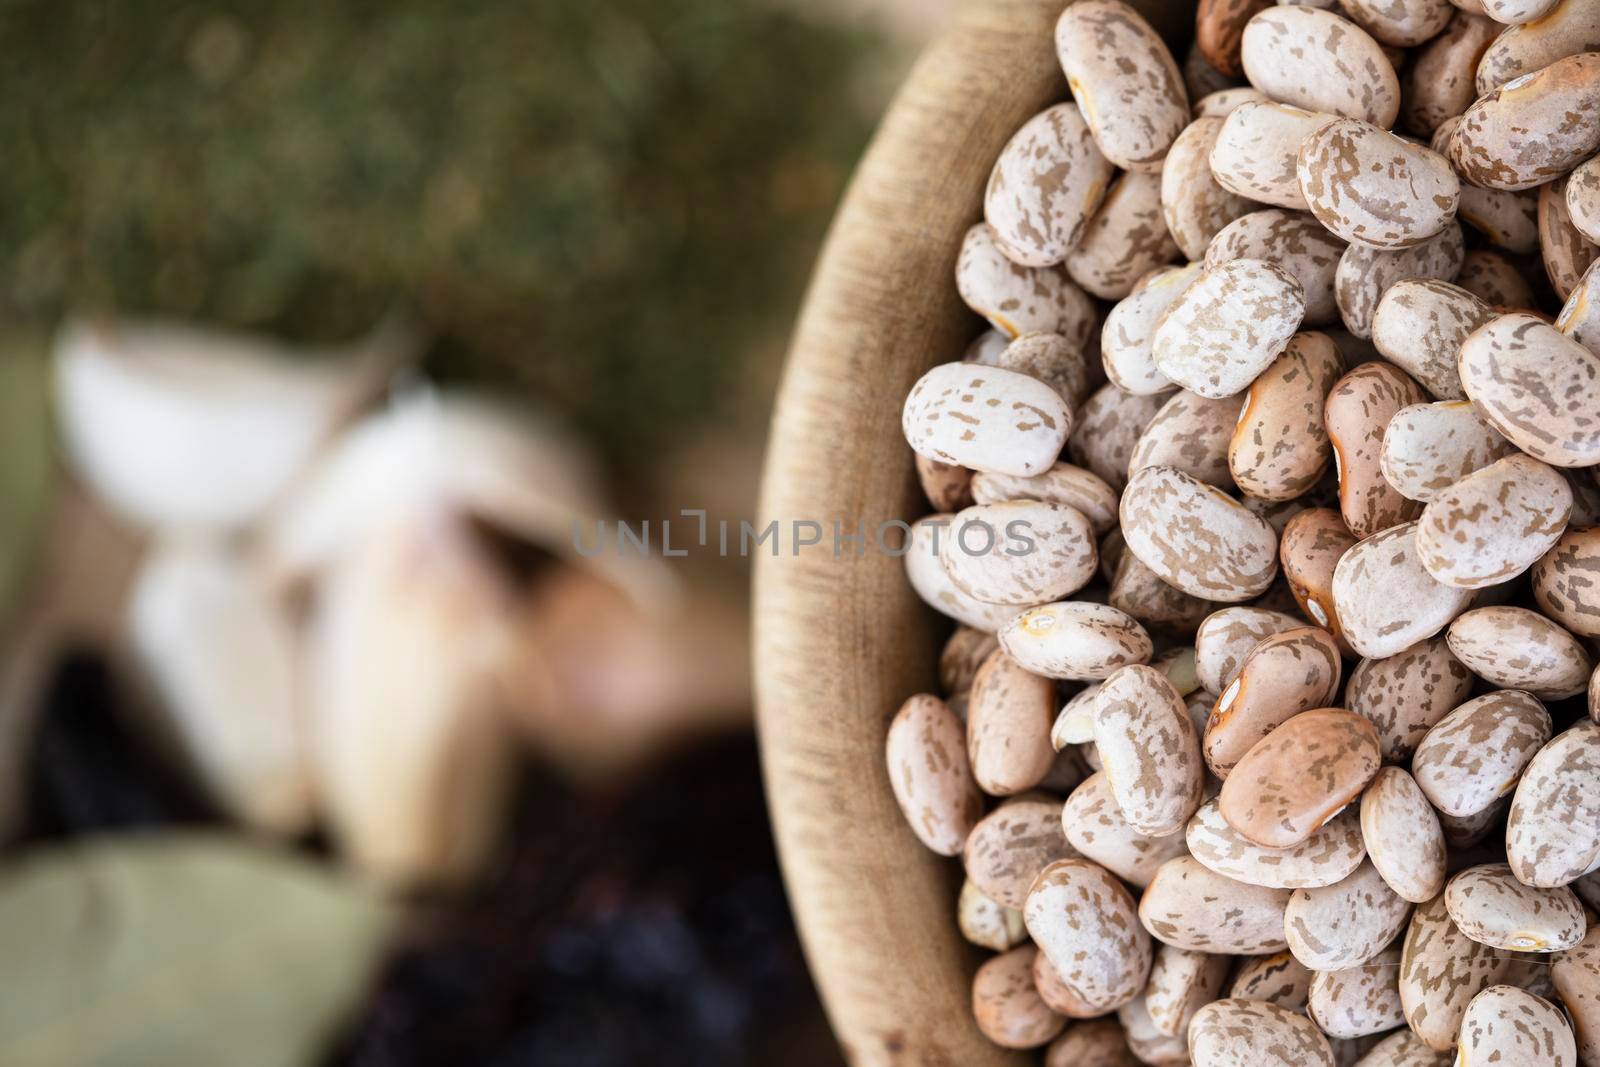 Flat lay of wooden bowl full of dried pinto beans with other spices out of focus on the table.